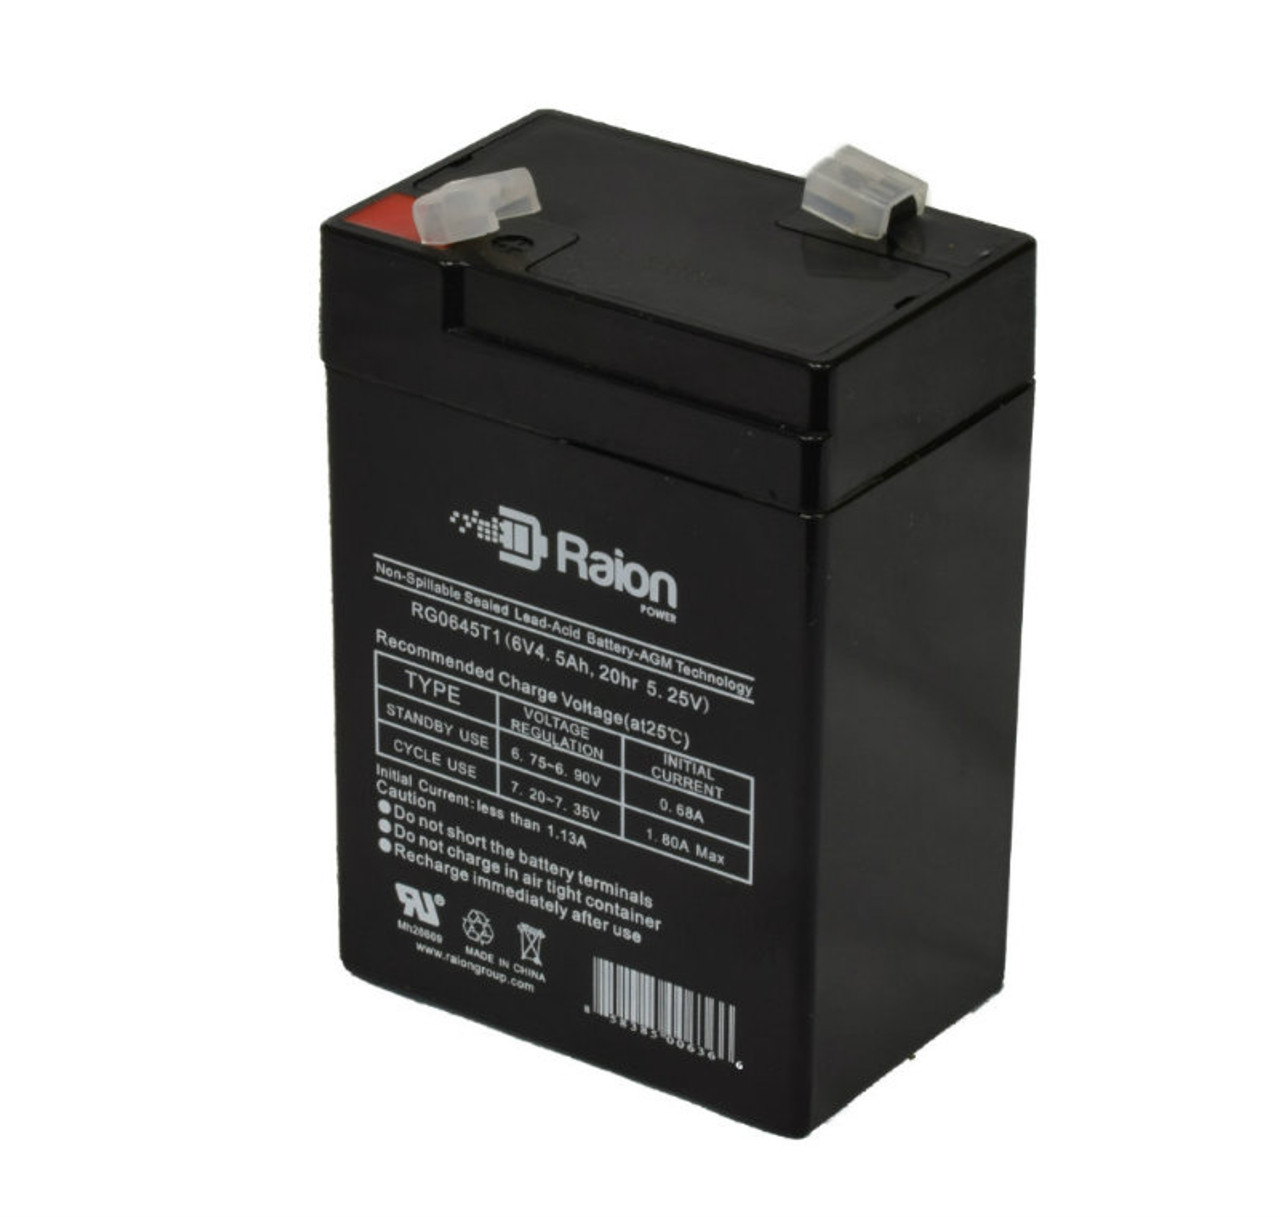 Raion Power RG0645T1 6V 4.5Ah Replacement Battery Cartridge for GP GB4.5-6